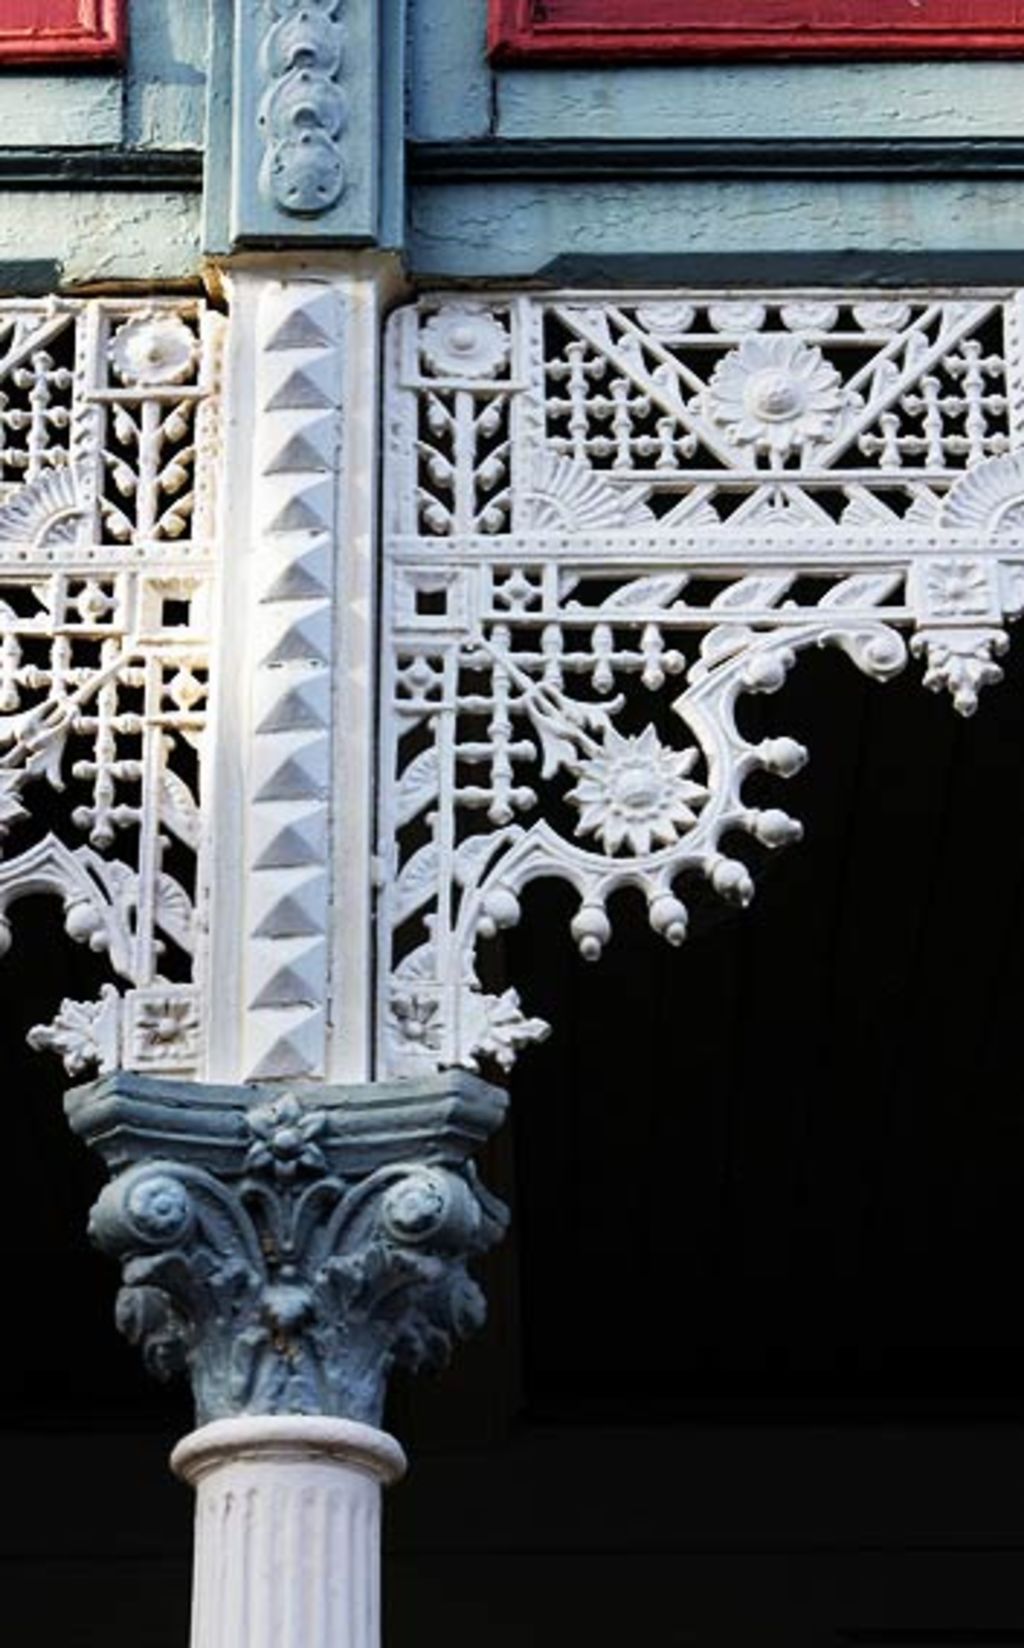 Iron lace puts the finishing touch on a period facade.